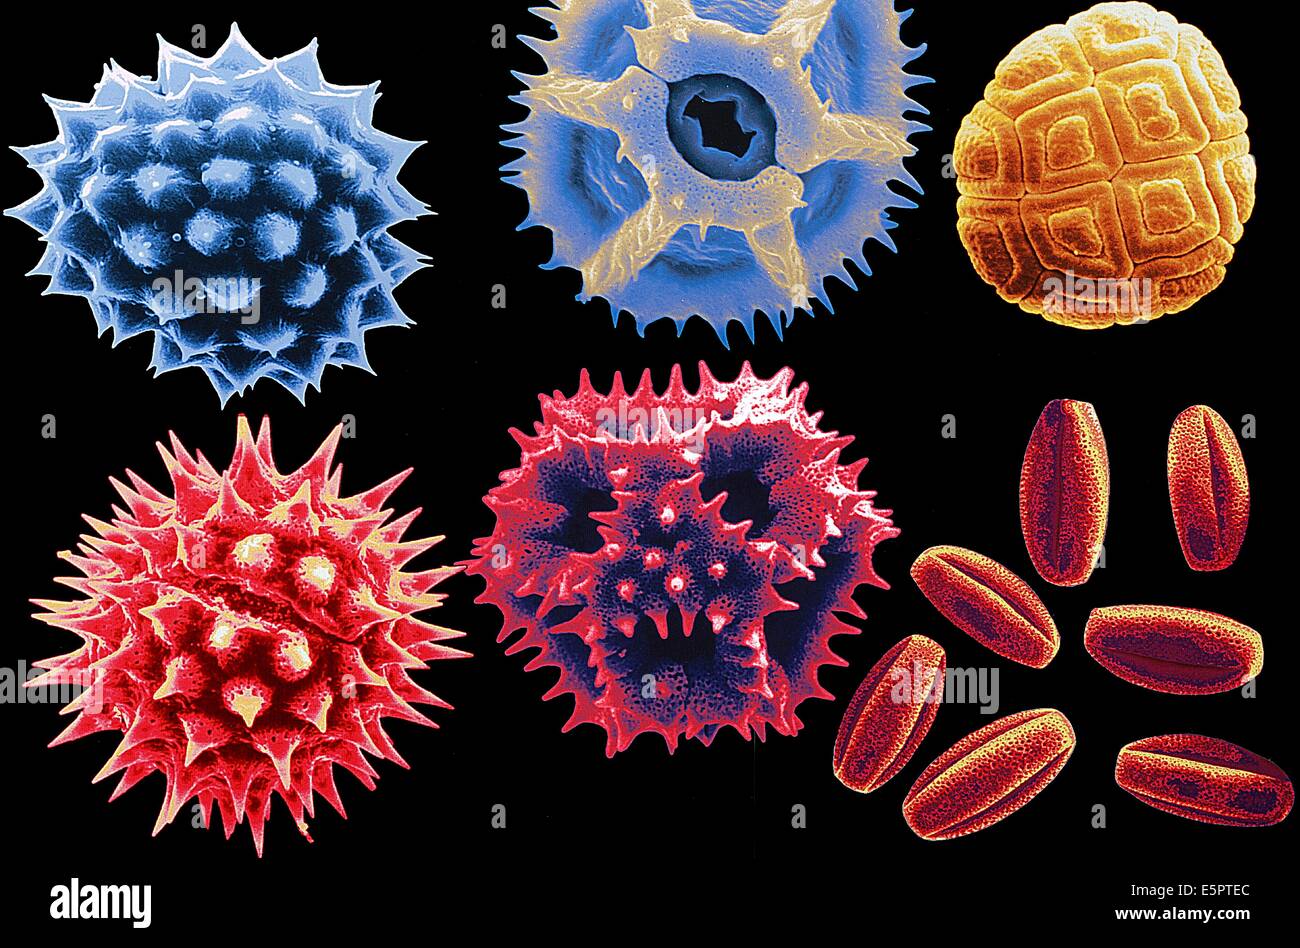 Scanning electron microscope view of differents pollens. Stock Photo